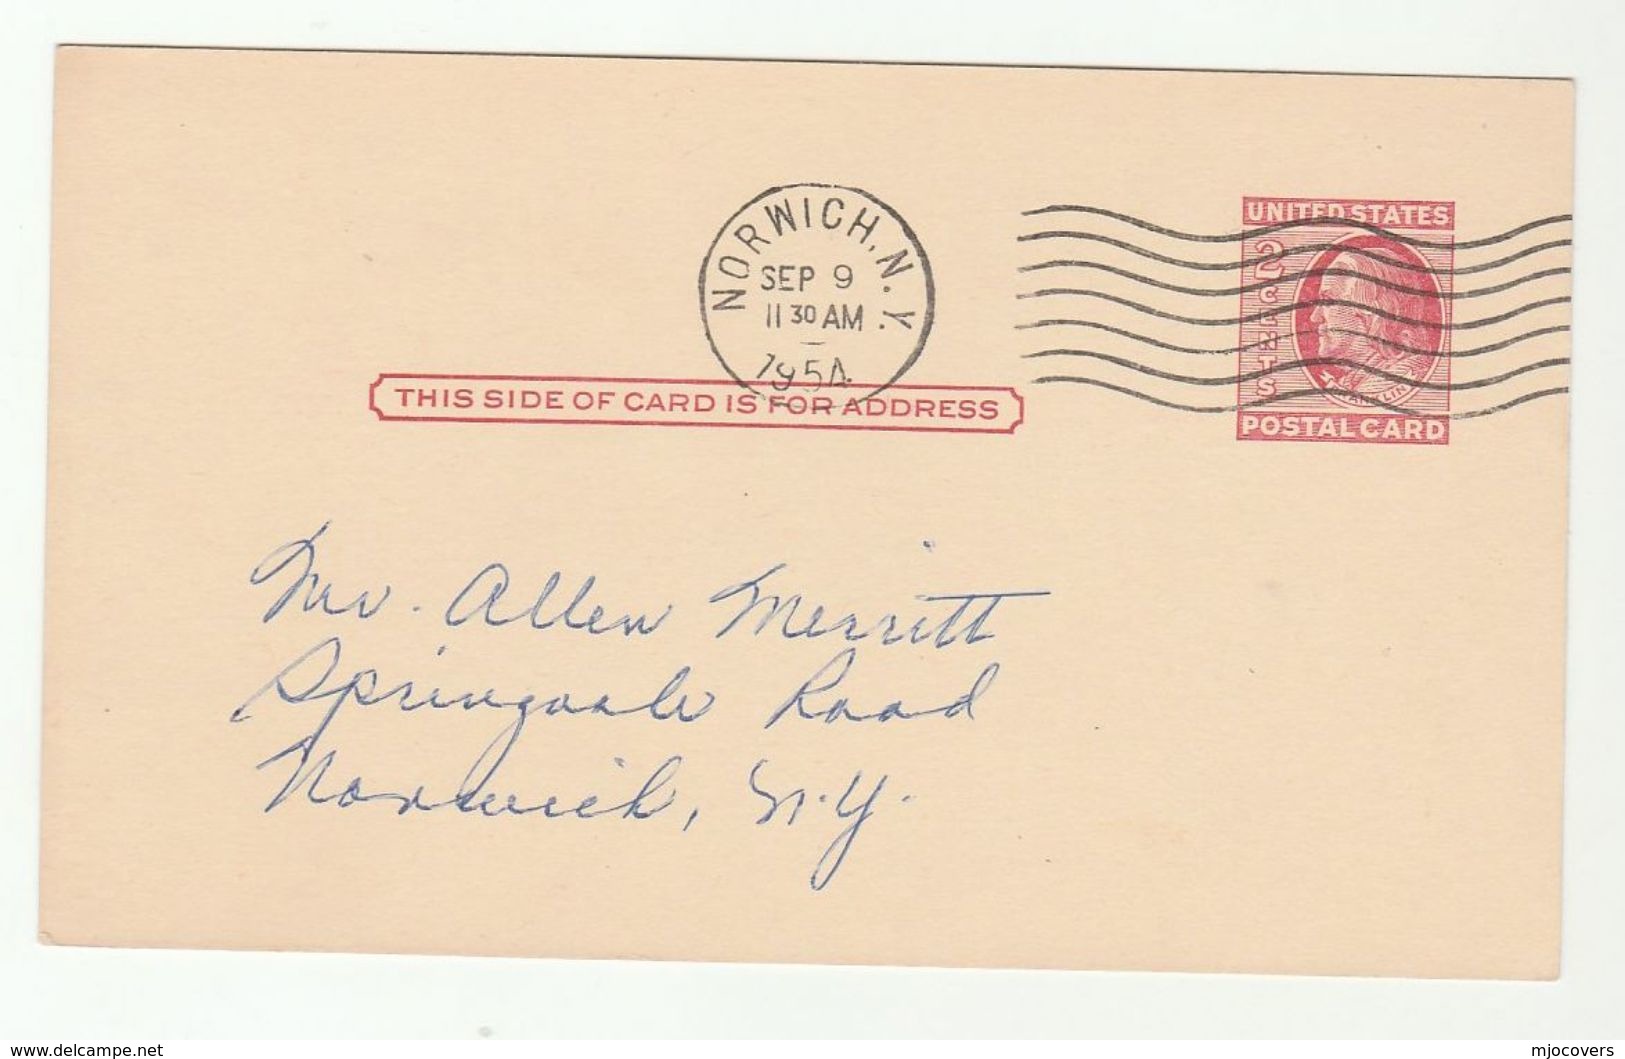 1954 Norwich NY USA CCLEOA COURTHOUSE MEETING  Postal STATIONERY CARD Cover Stamps - 1941-60